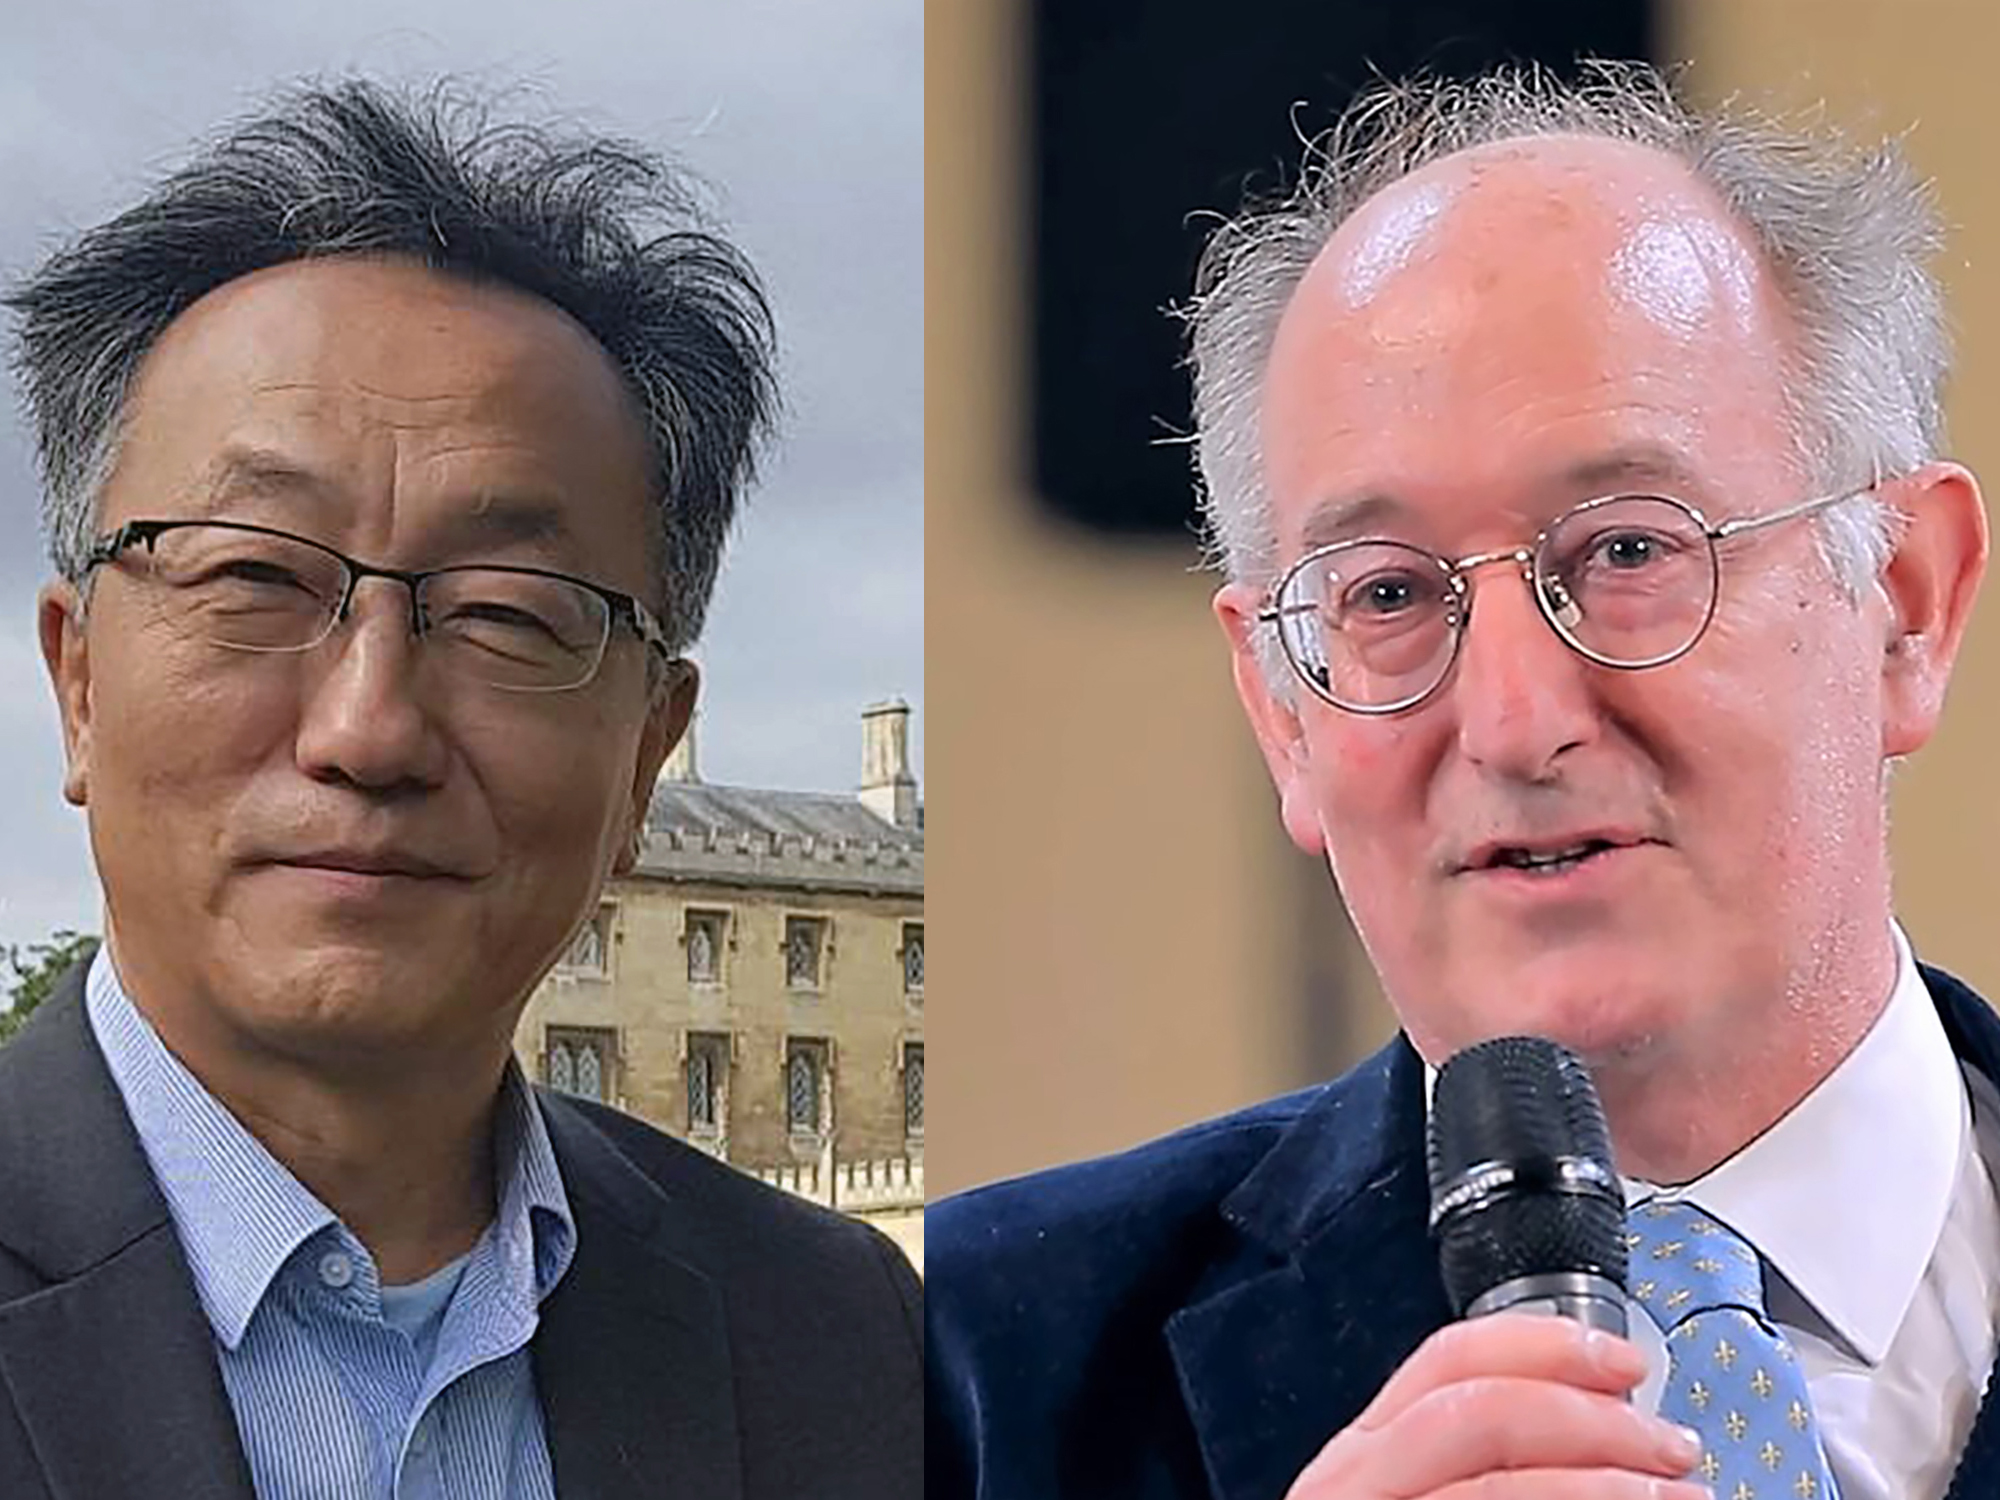 Dominic Lieven and Heonik Kwon (권헌익) “Ukraine, empires and wars” Trinity Japan zoom discussion (Thursday 20 October 2022)